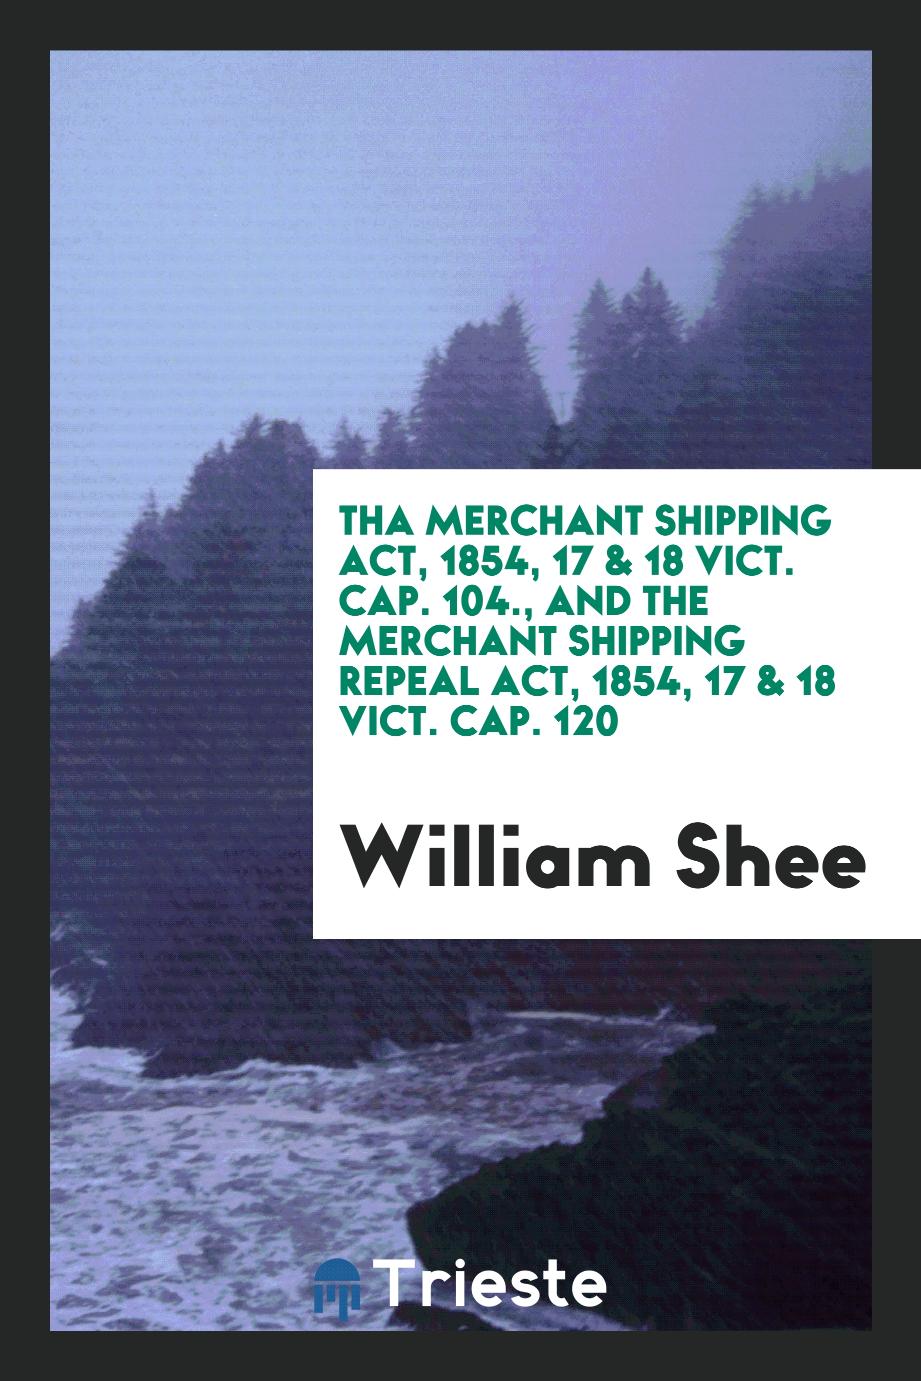 Tha Merchant Shipping Act, 1854, 17 & 18 Vict. Cap. 104., and the Merchant Shipping Repeal Act, 1854, 17 & 18 Vict. Cap. 120